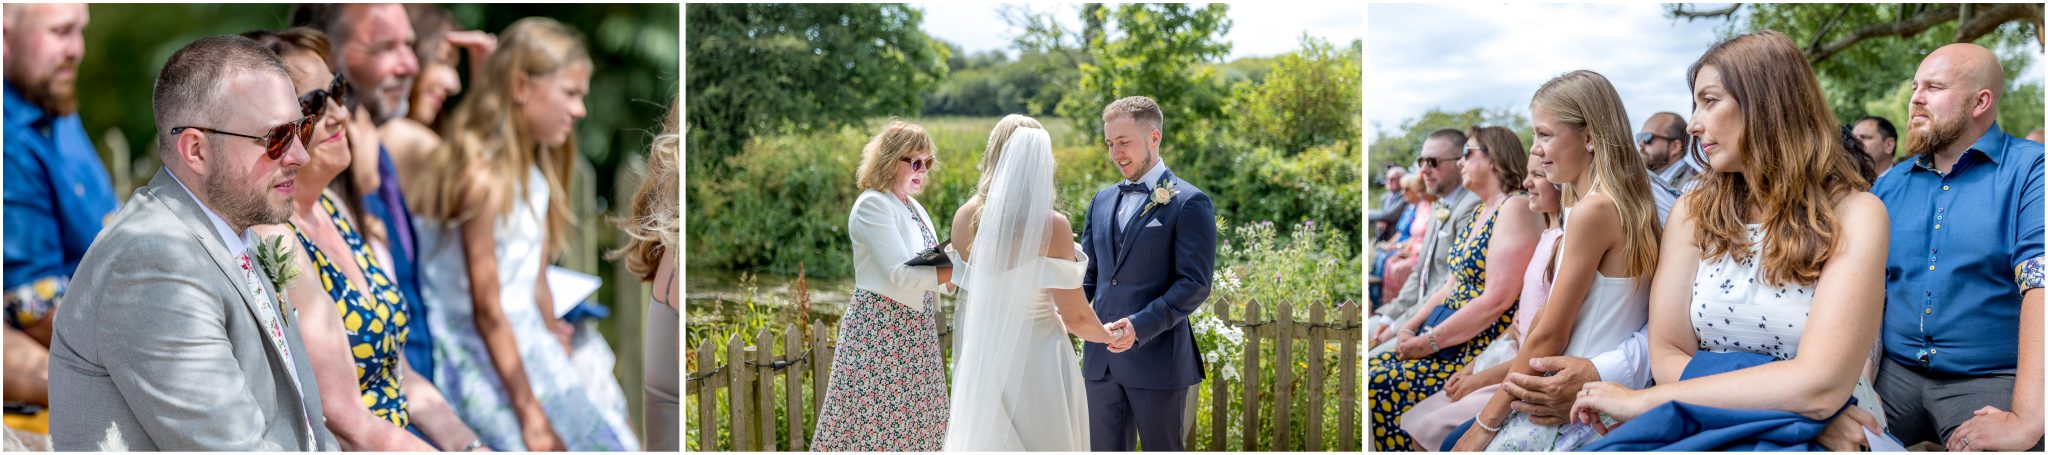 Wedding guests watch the outdoor riverside marriage ceremony in the sunshine